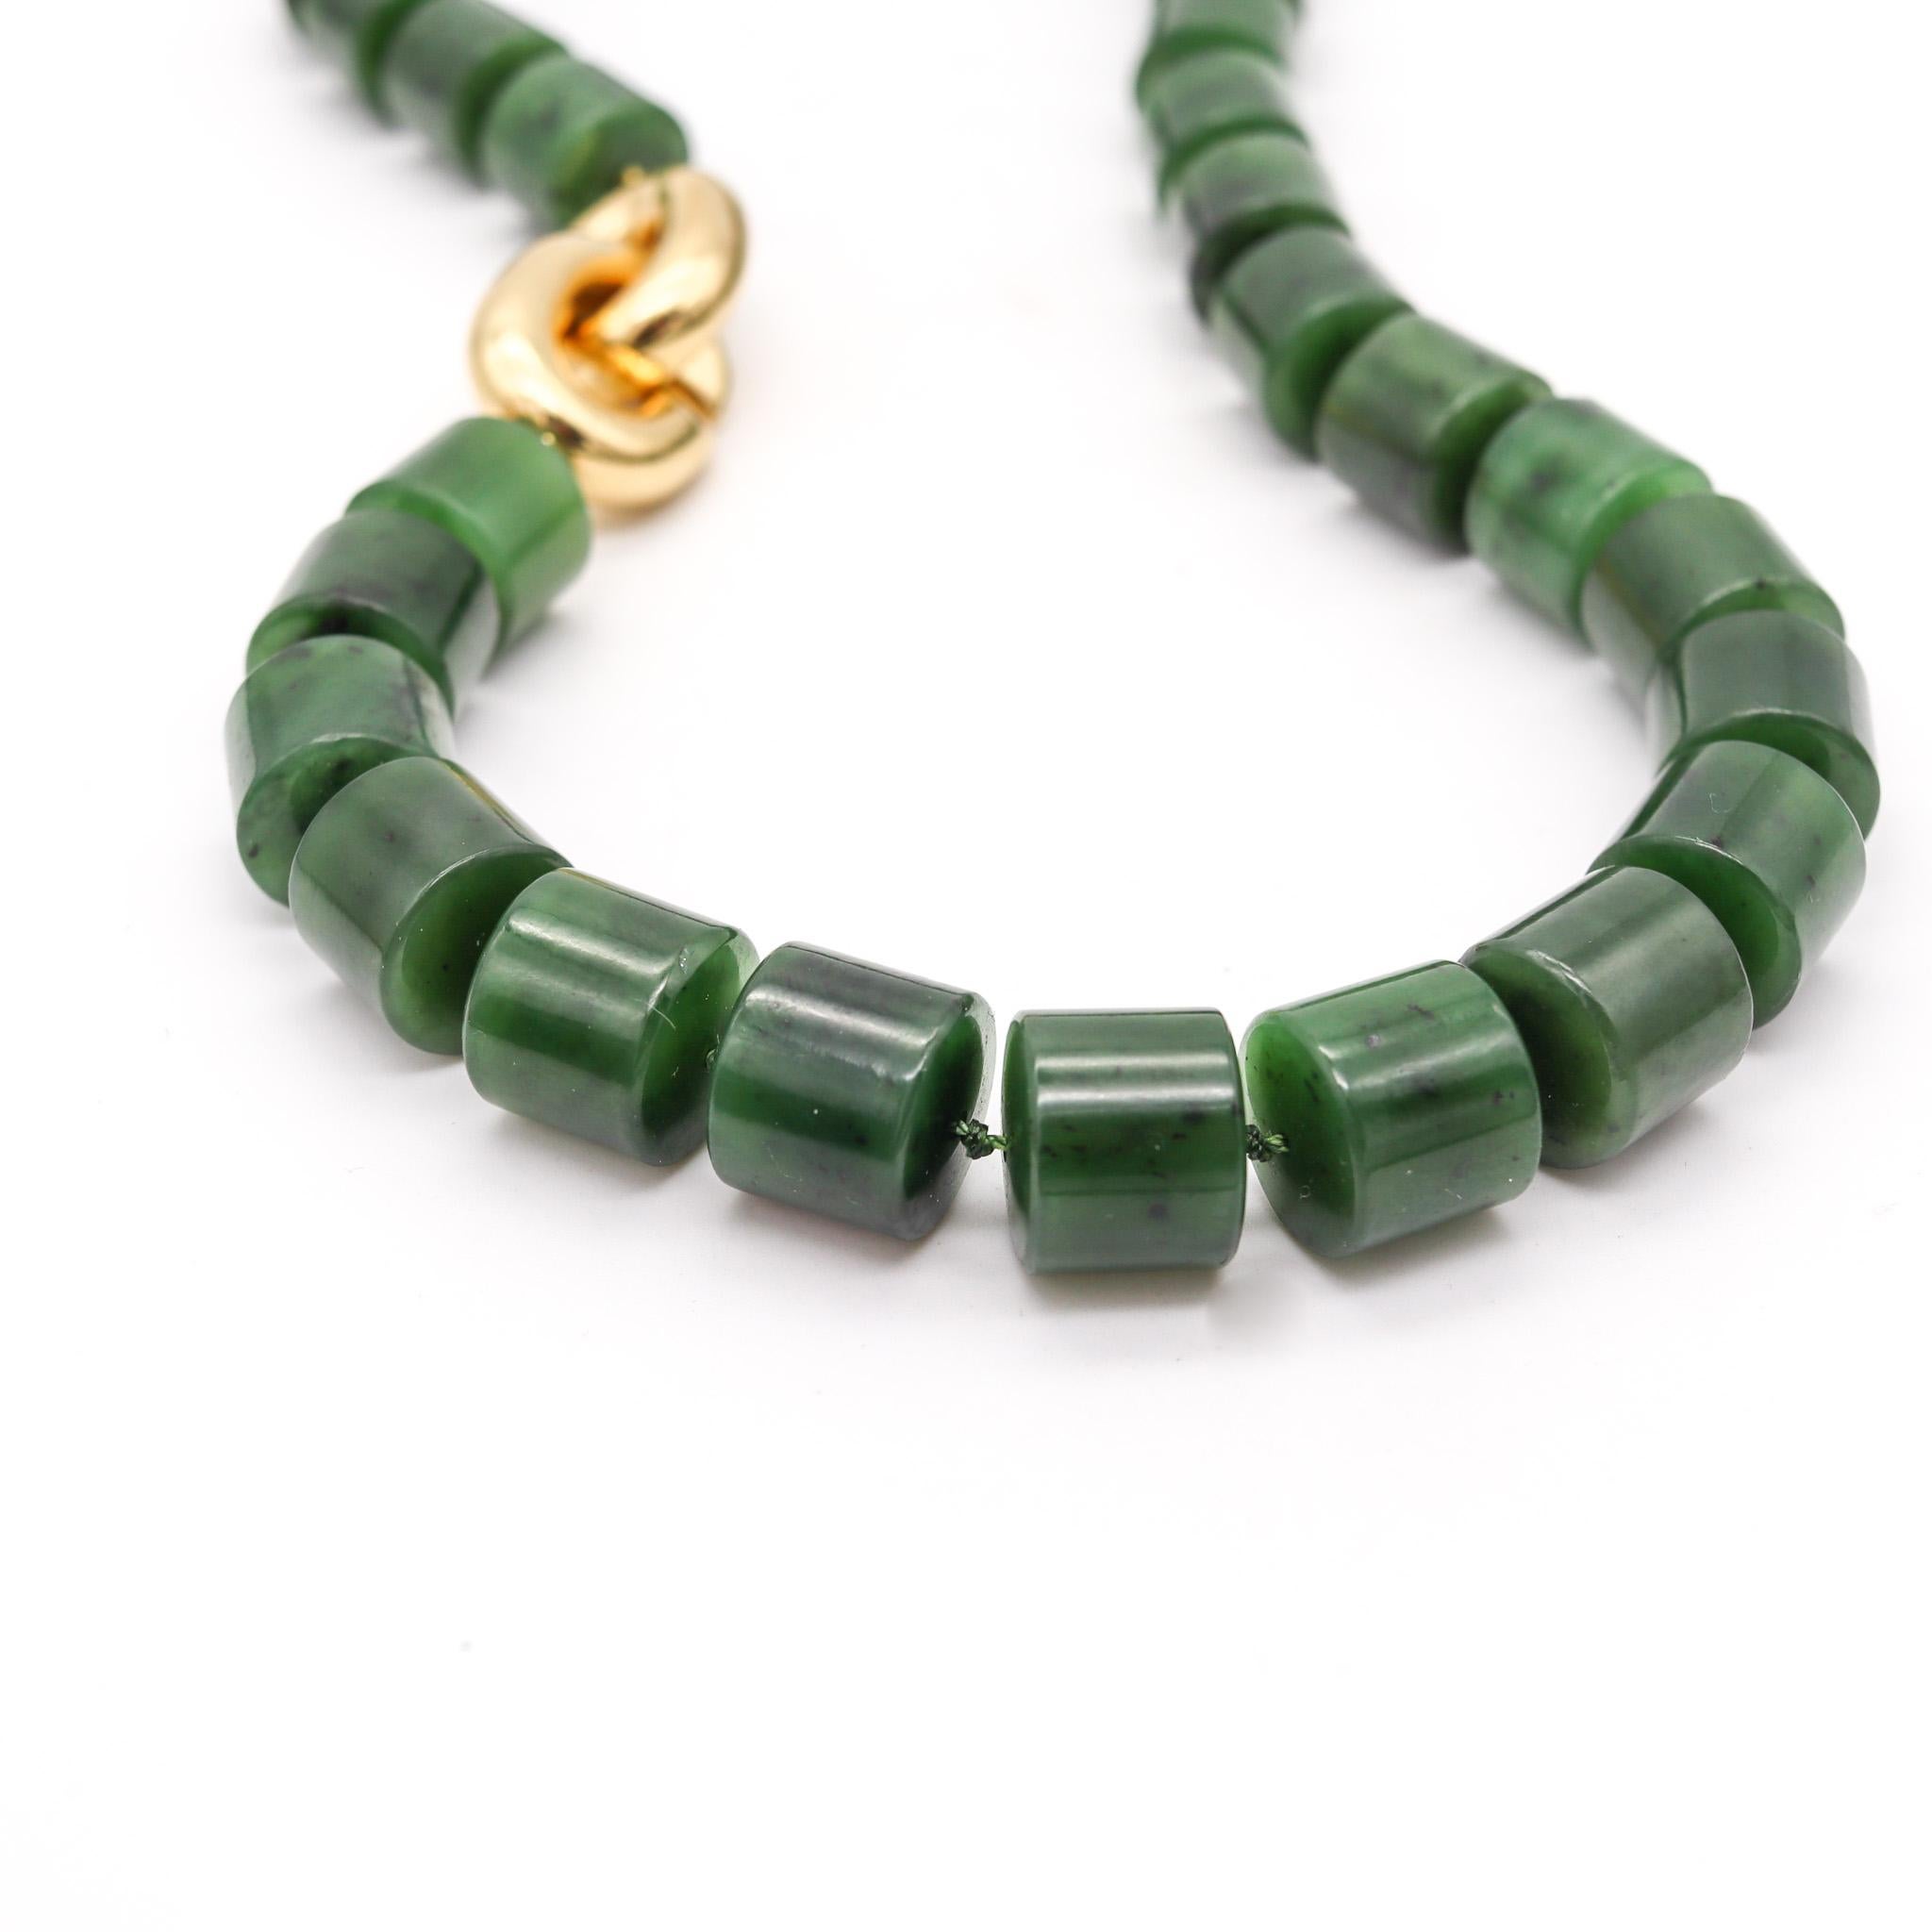 Nephrite green jade necklace designed by Angela Cummings.

A very rare modernist piece, created in New York city by Angela Cummings, back in the 1993. This elegant necklace is composed by multiples elements carved of green jade, mounted in a strand